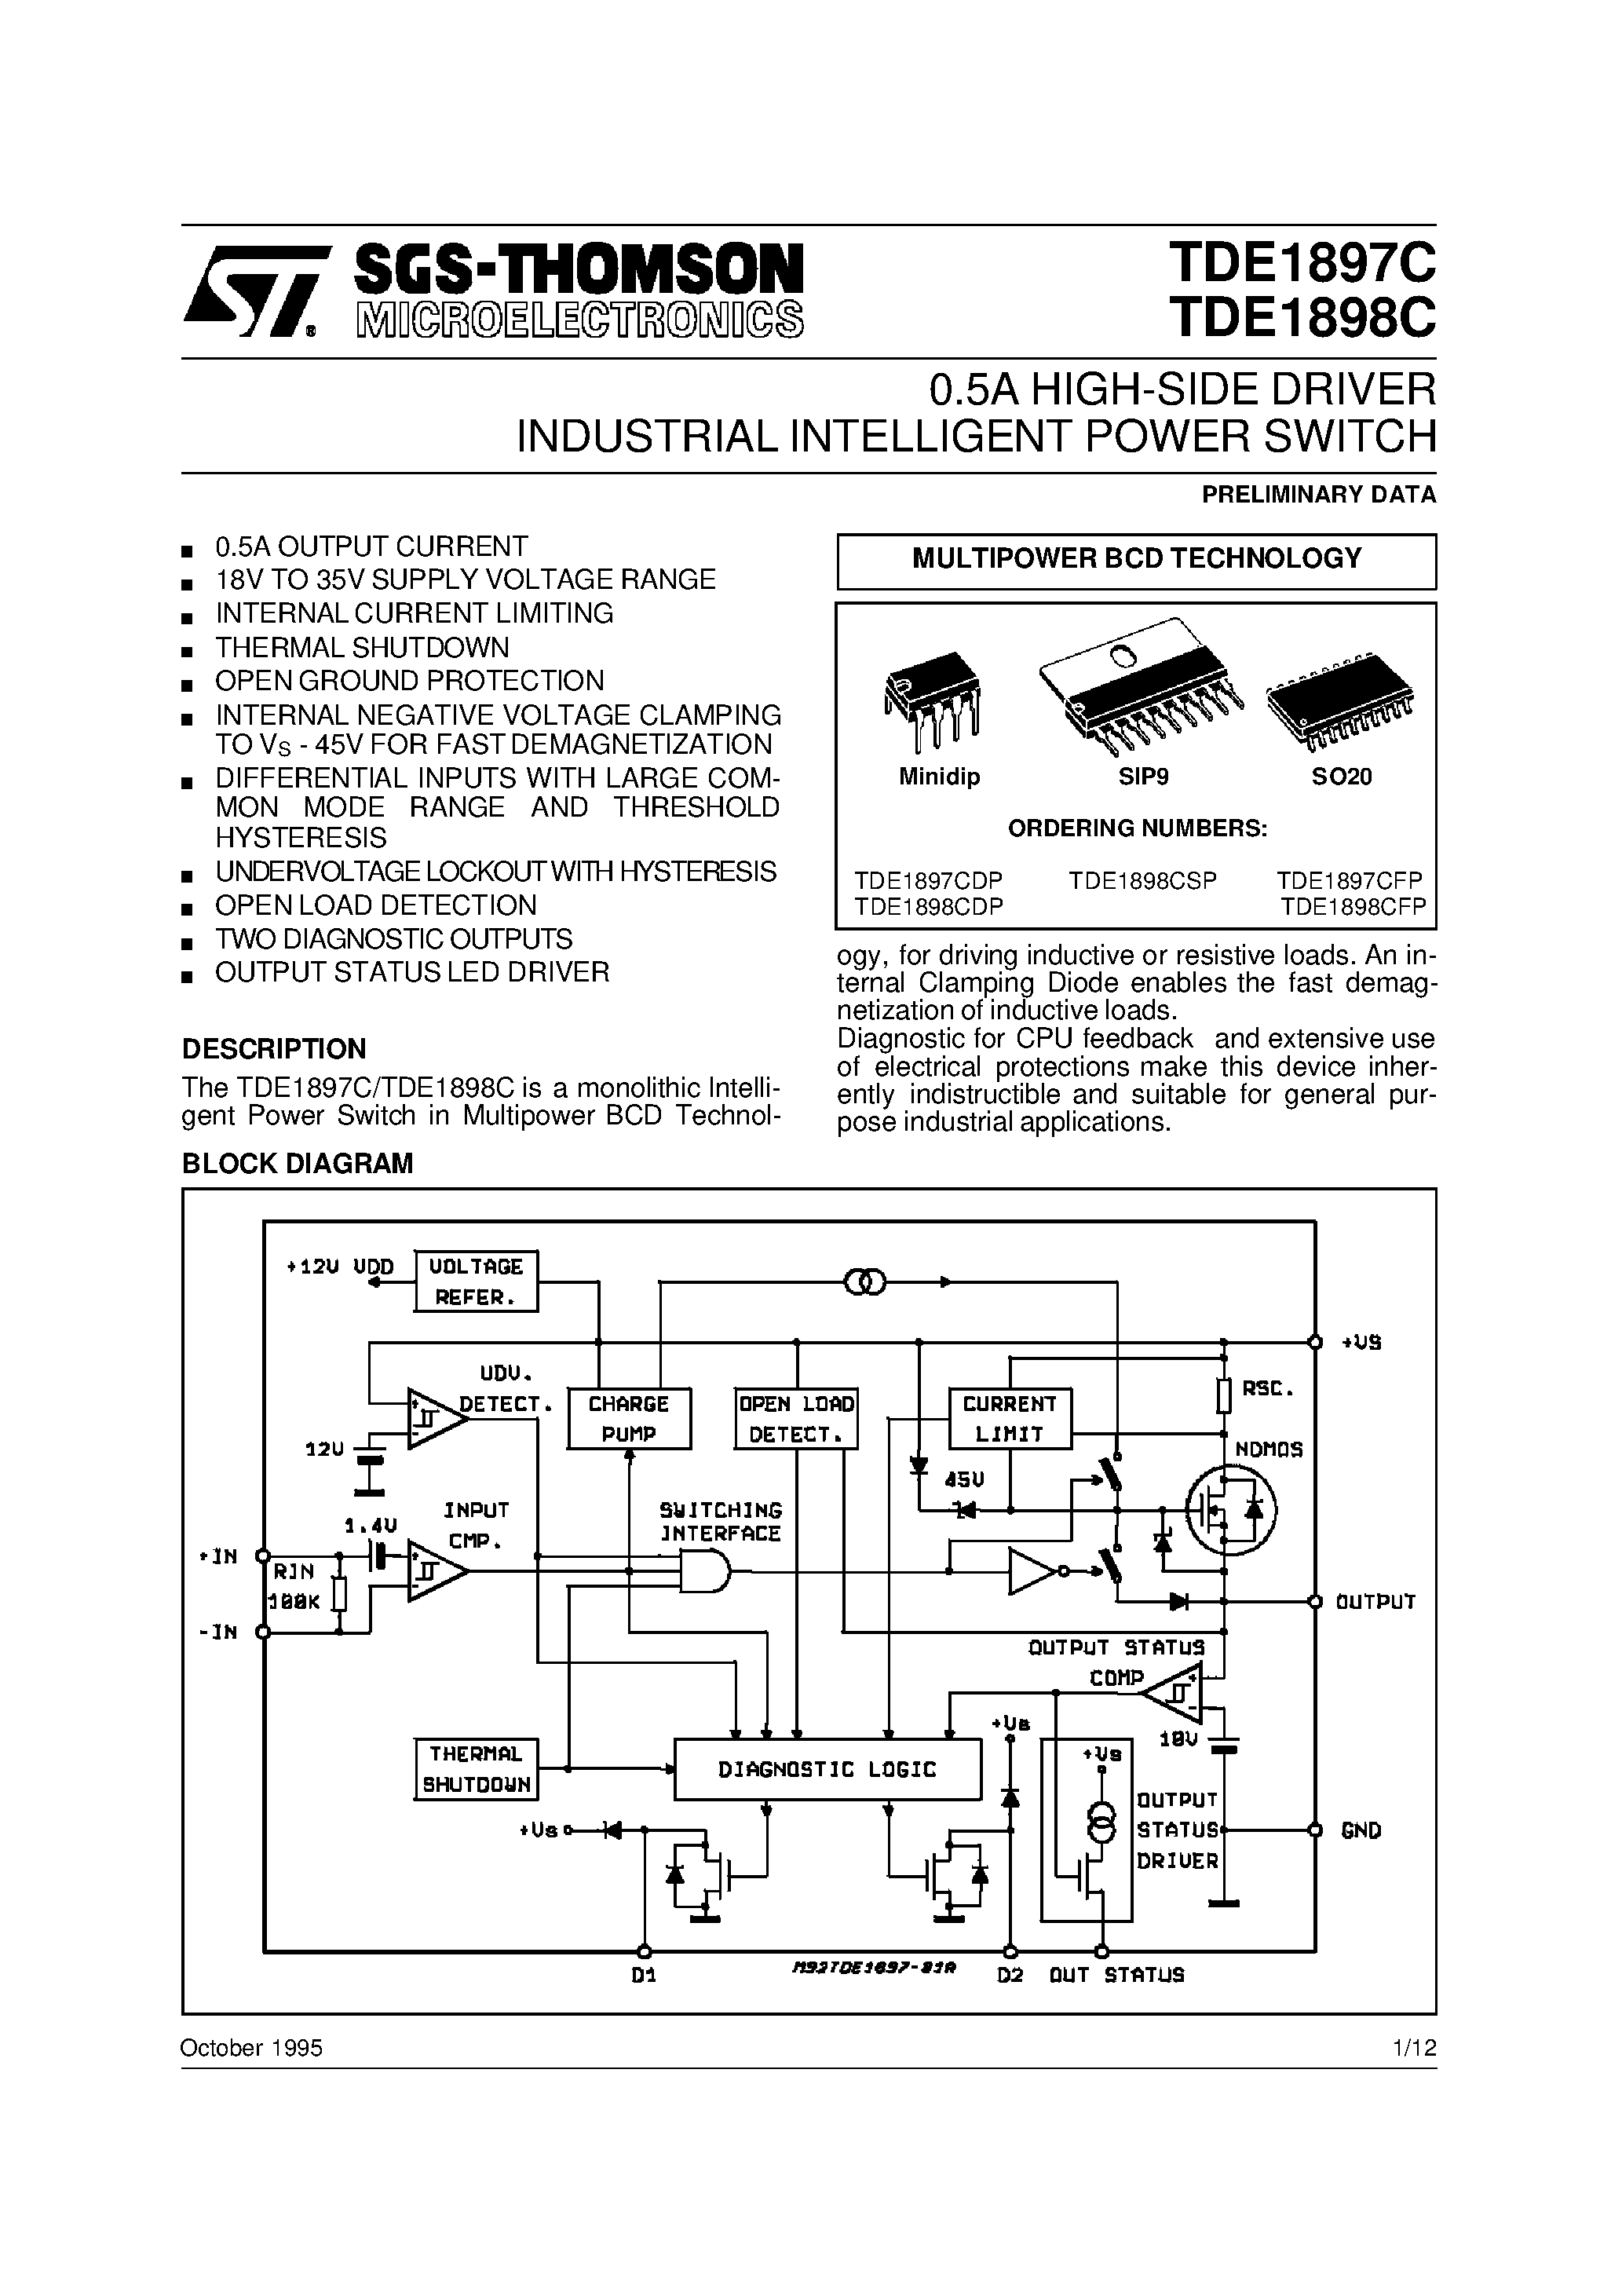 Даташит TDE1898CDP-0.5A HIGH-SIDE DRIVER INDUSTRIAL INTELLIGENT POWER SWITCH страница 1